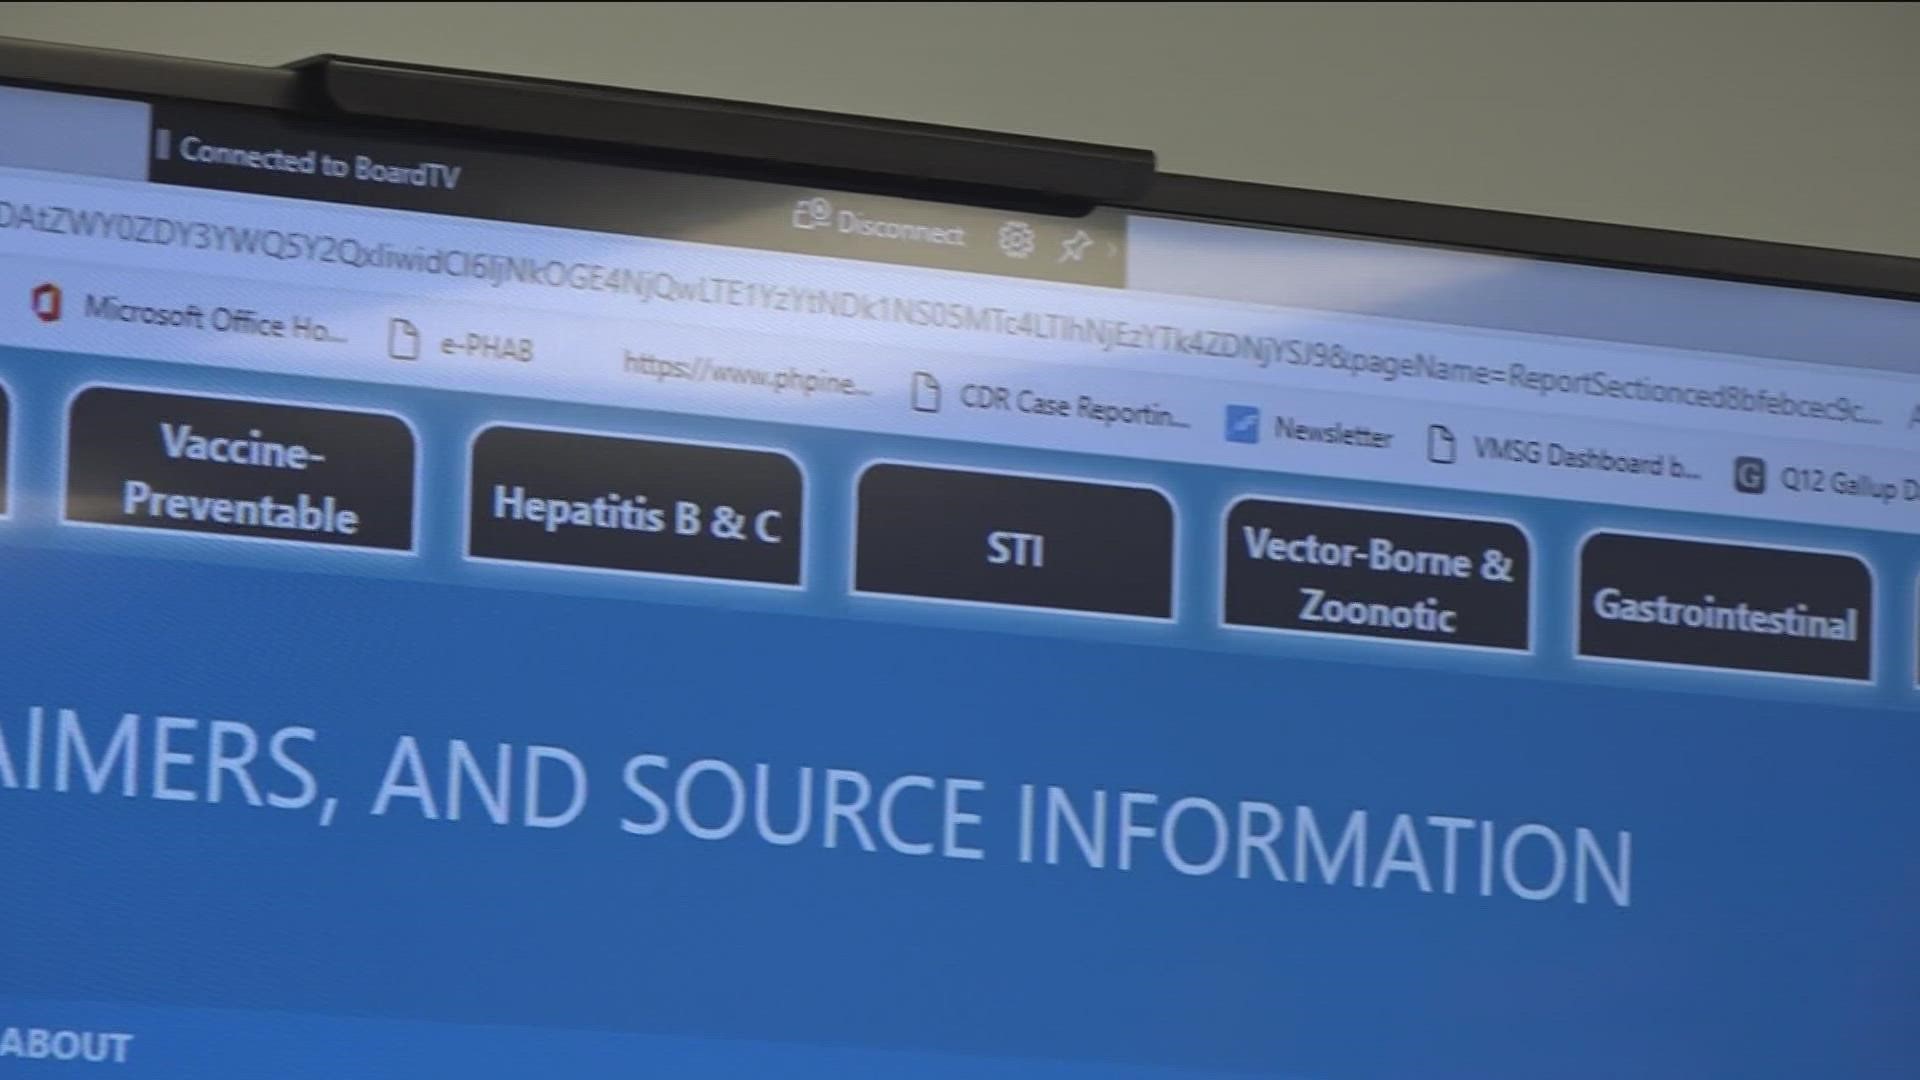 The dashboard allows visitors to track multiple diseases across the county, down to local zip codes.